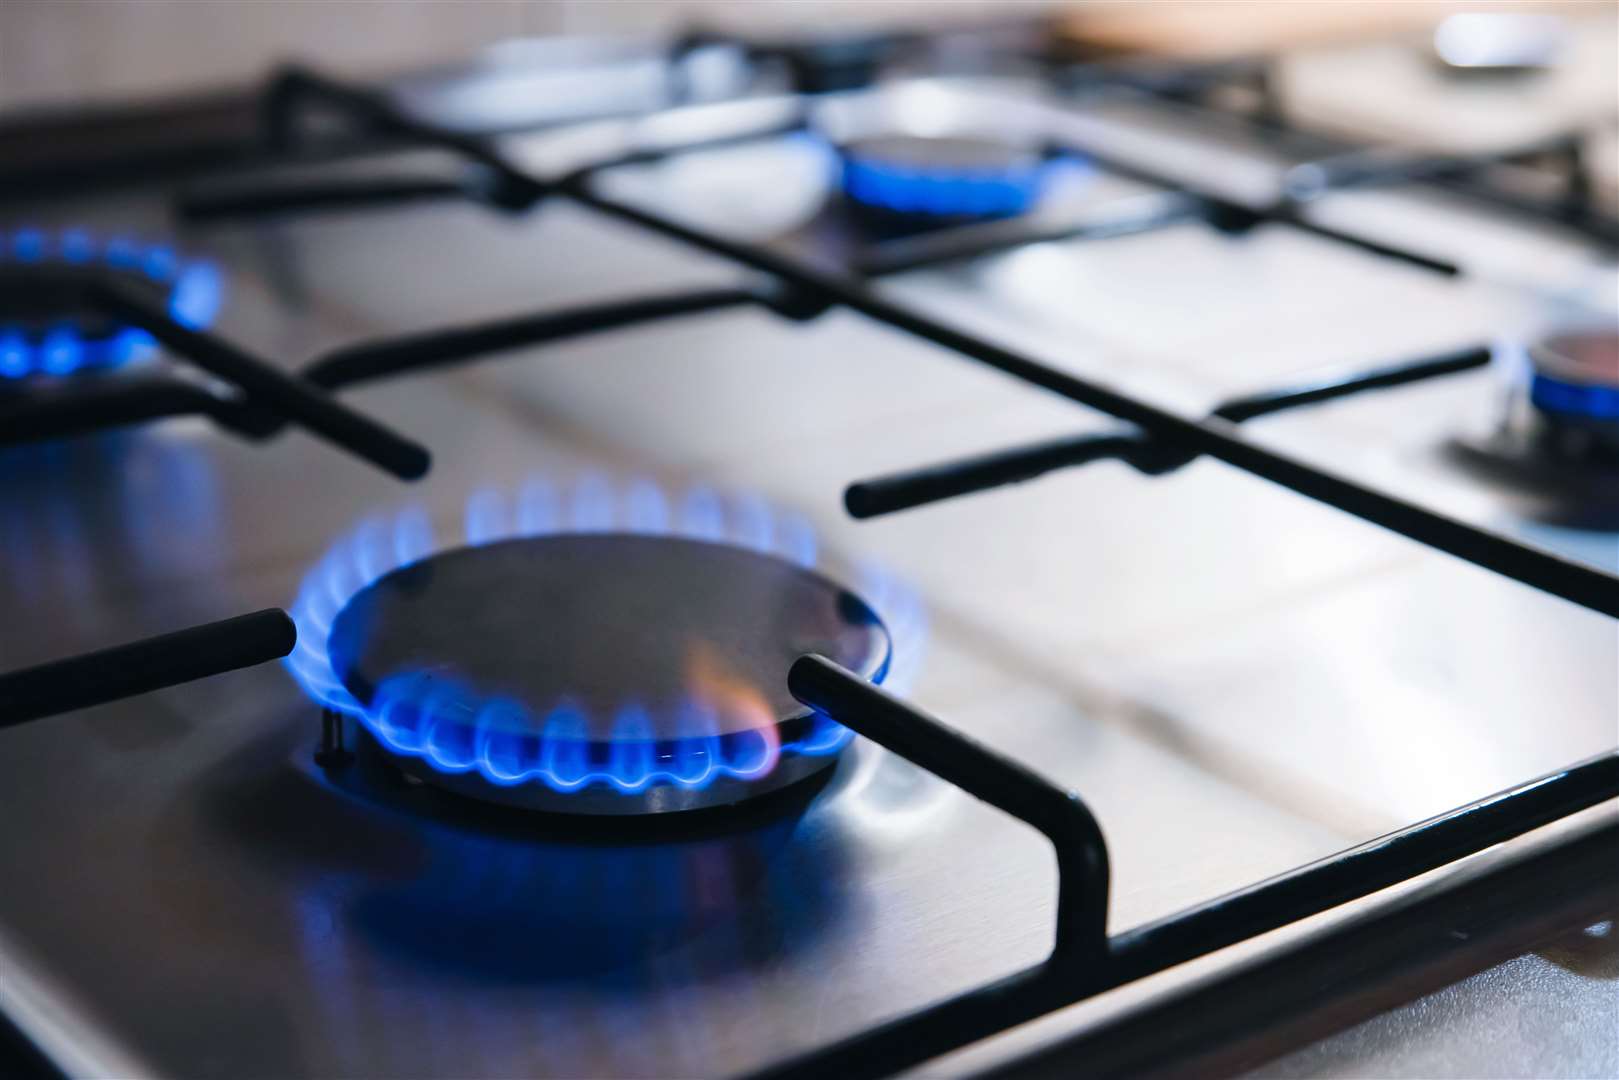 Households could see energy bills increase as much as £195 a year as a result of spending more time at home.